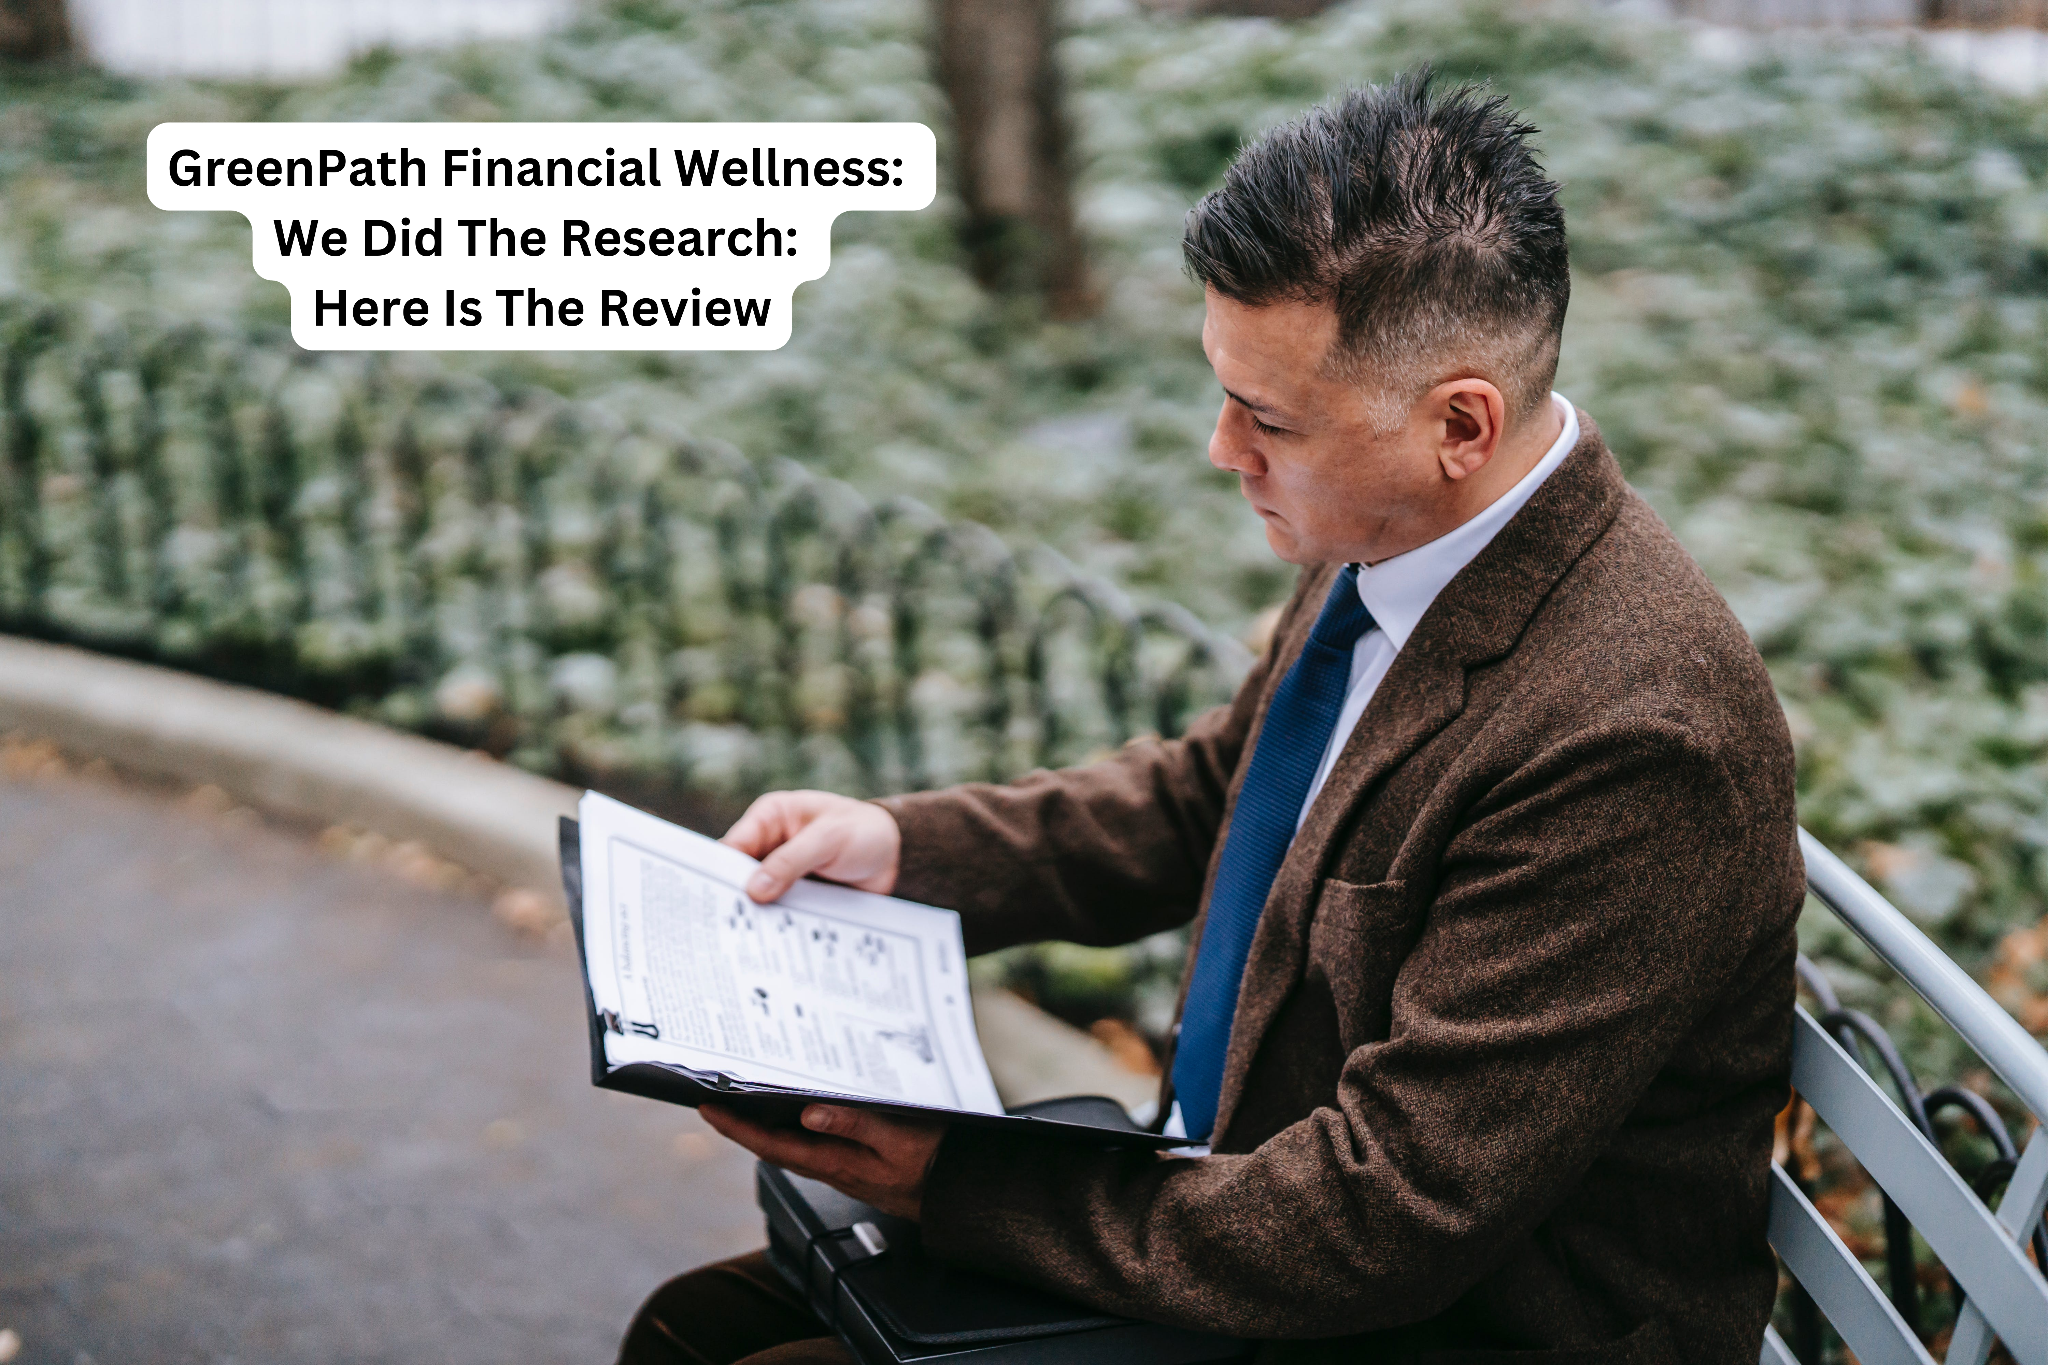 GreenPath Financial Wellness: We Did The Research: Here Is The Review